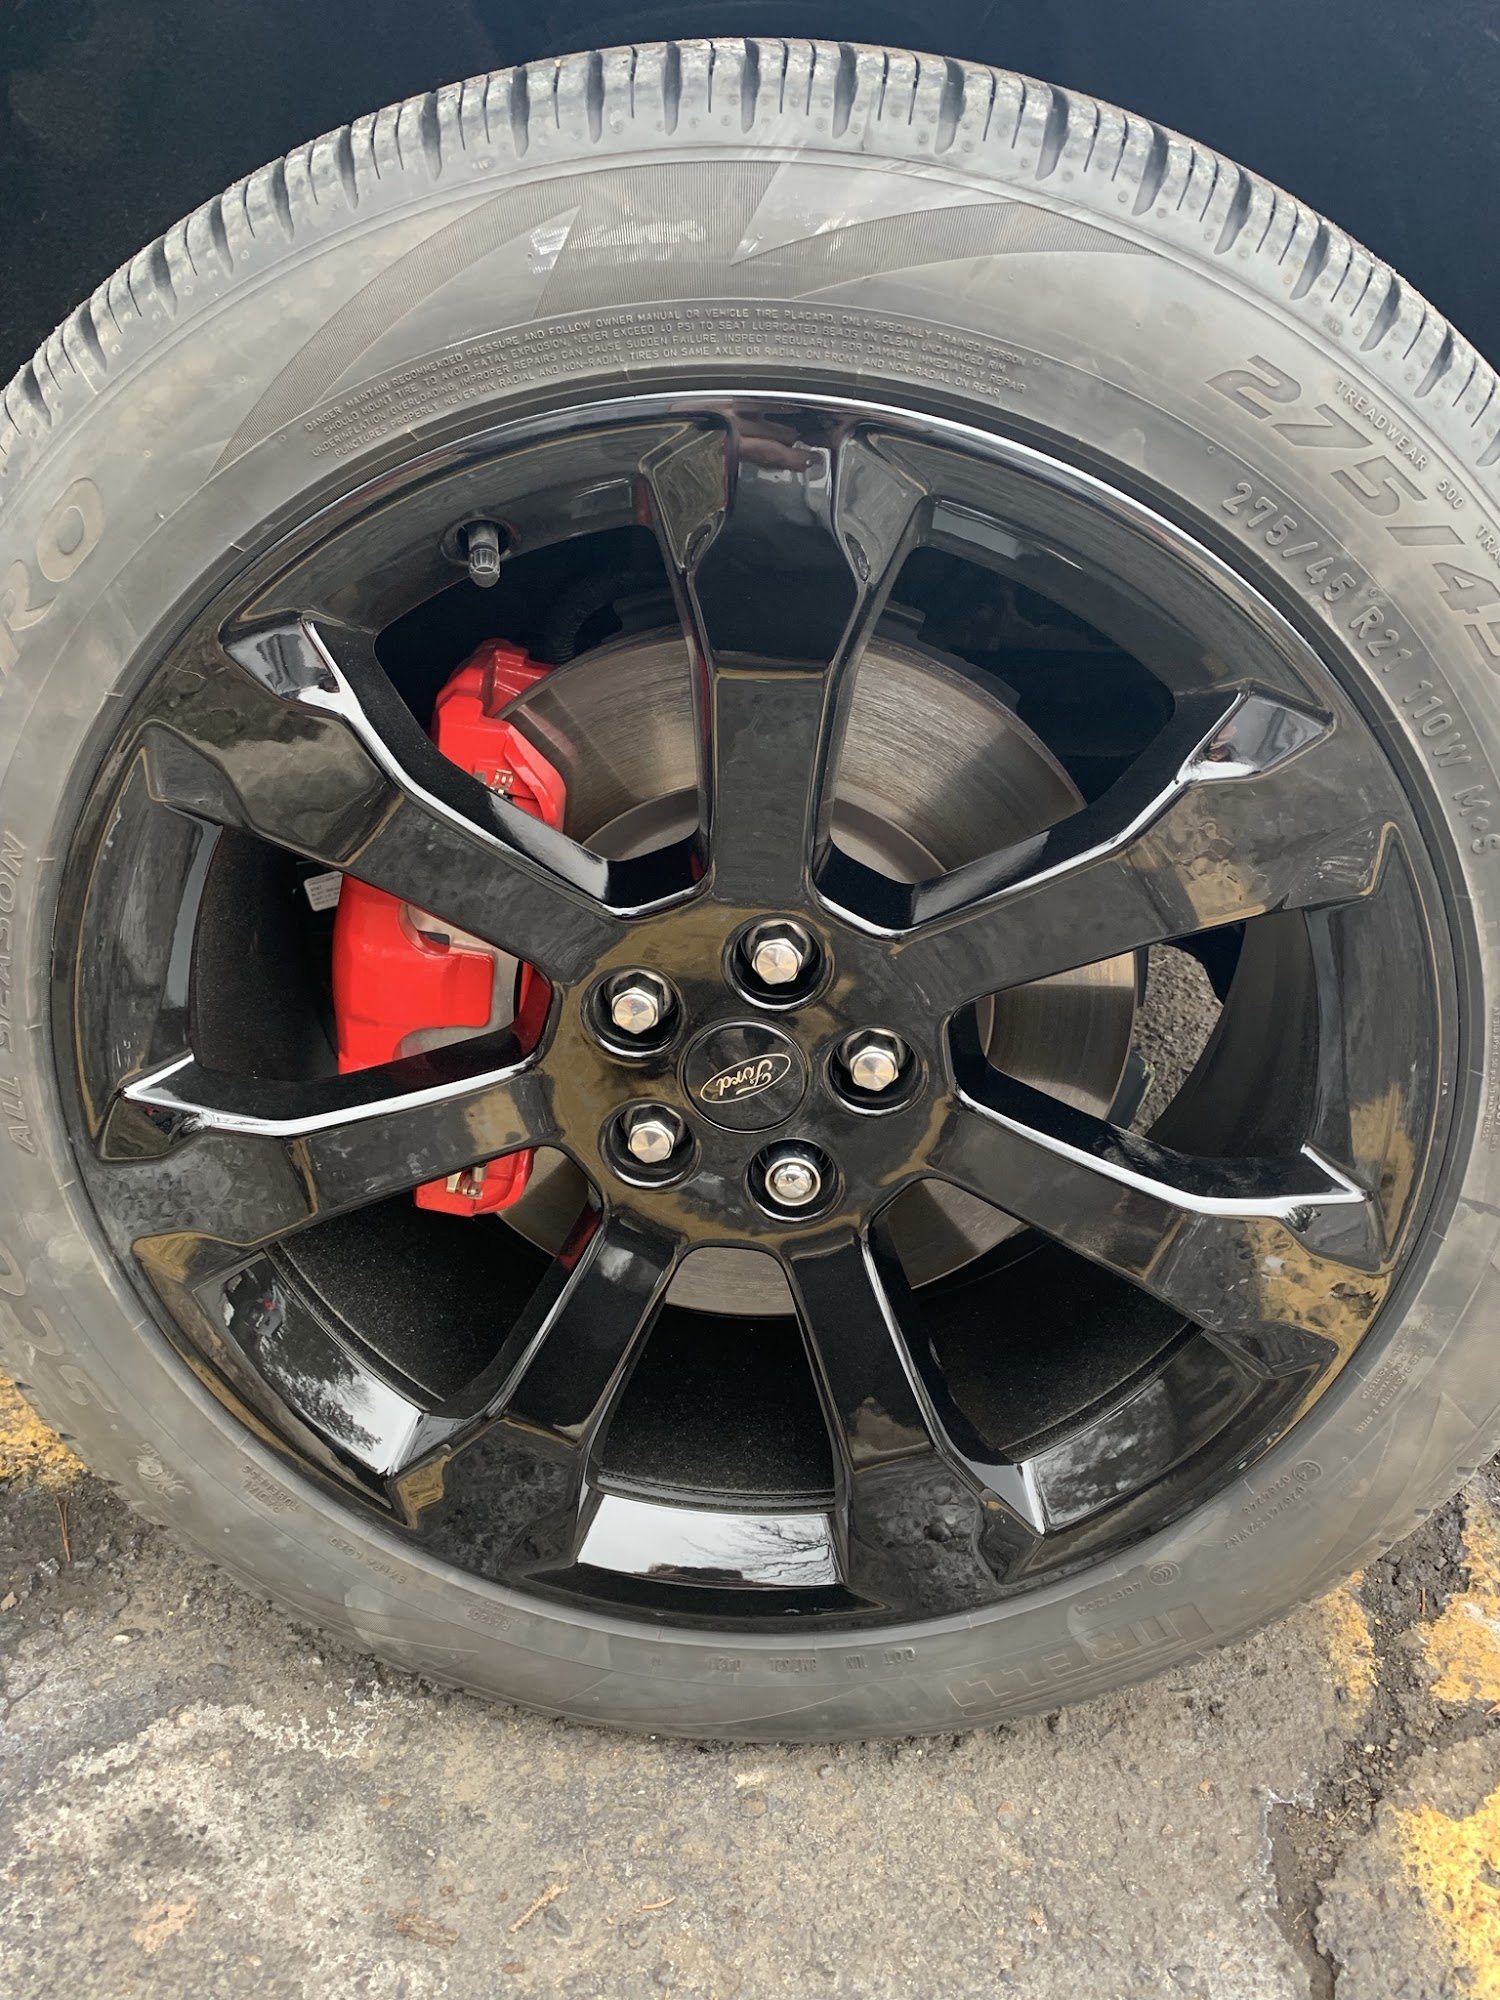 Alloy Wheel Repair Specialists of Detroit